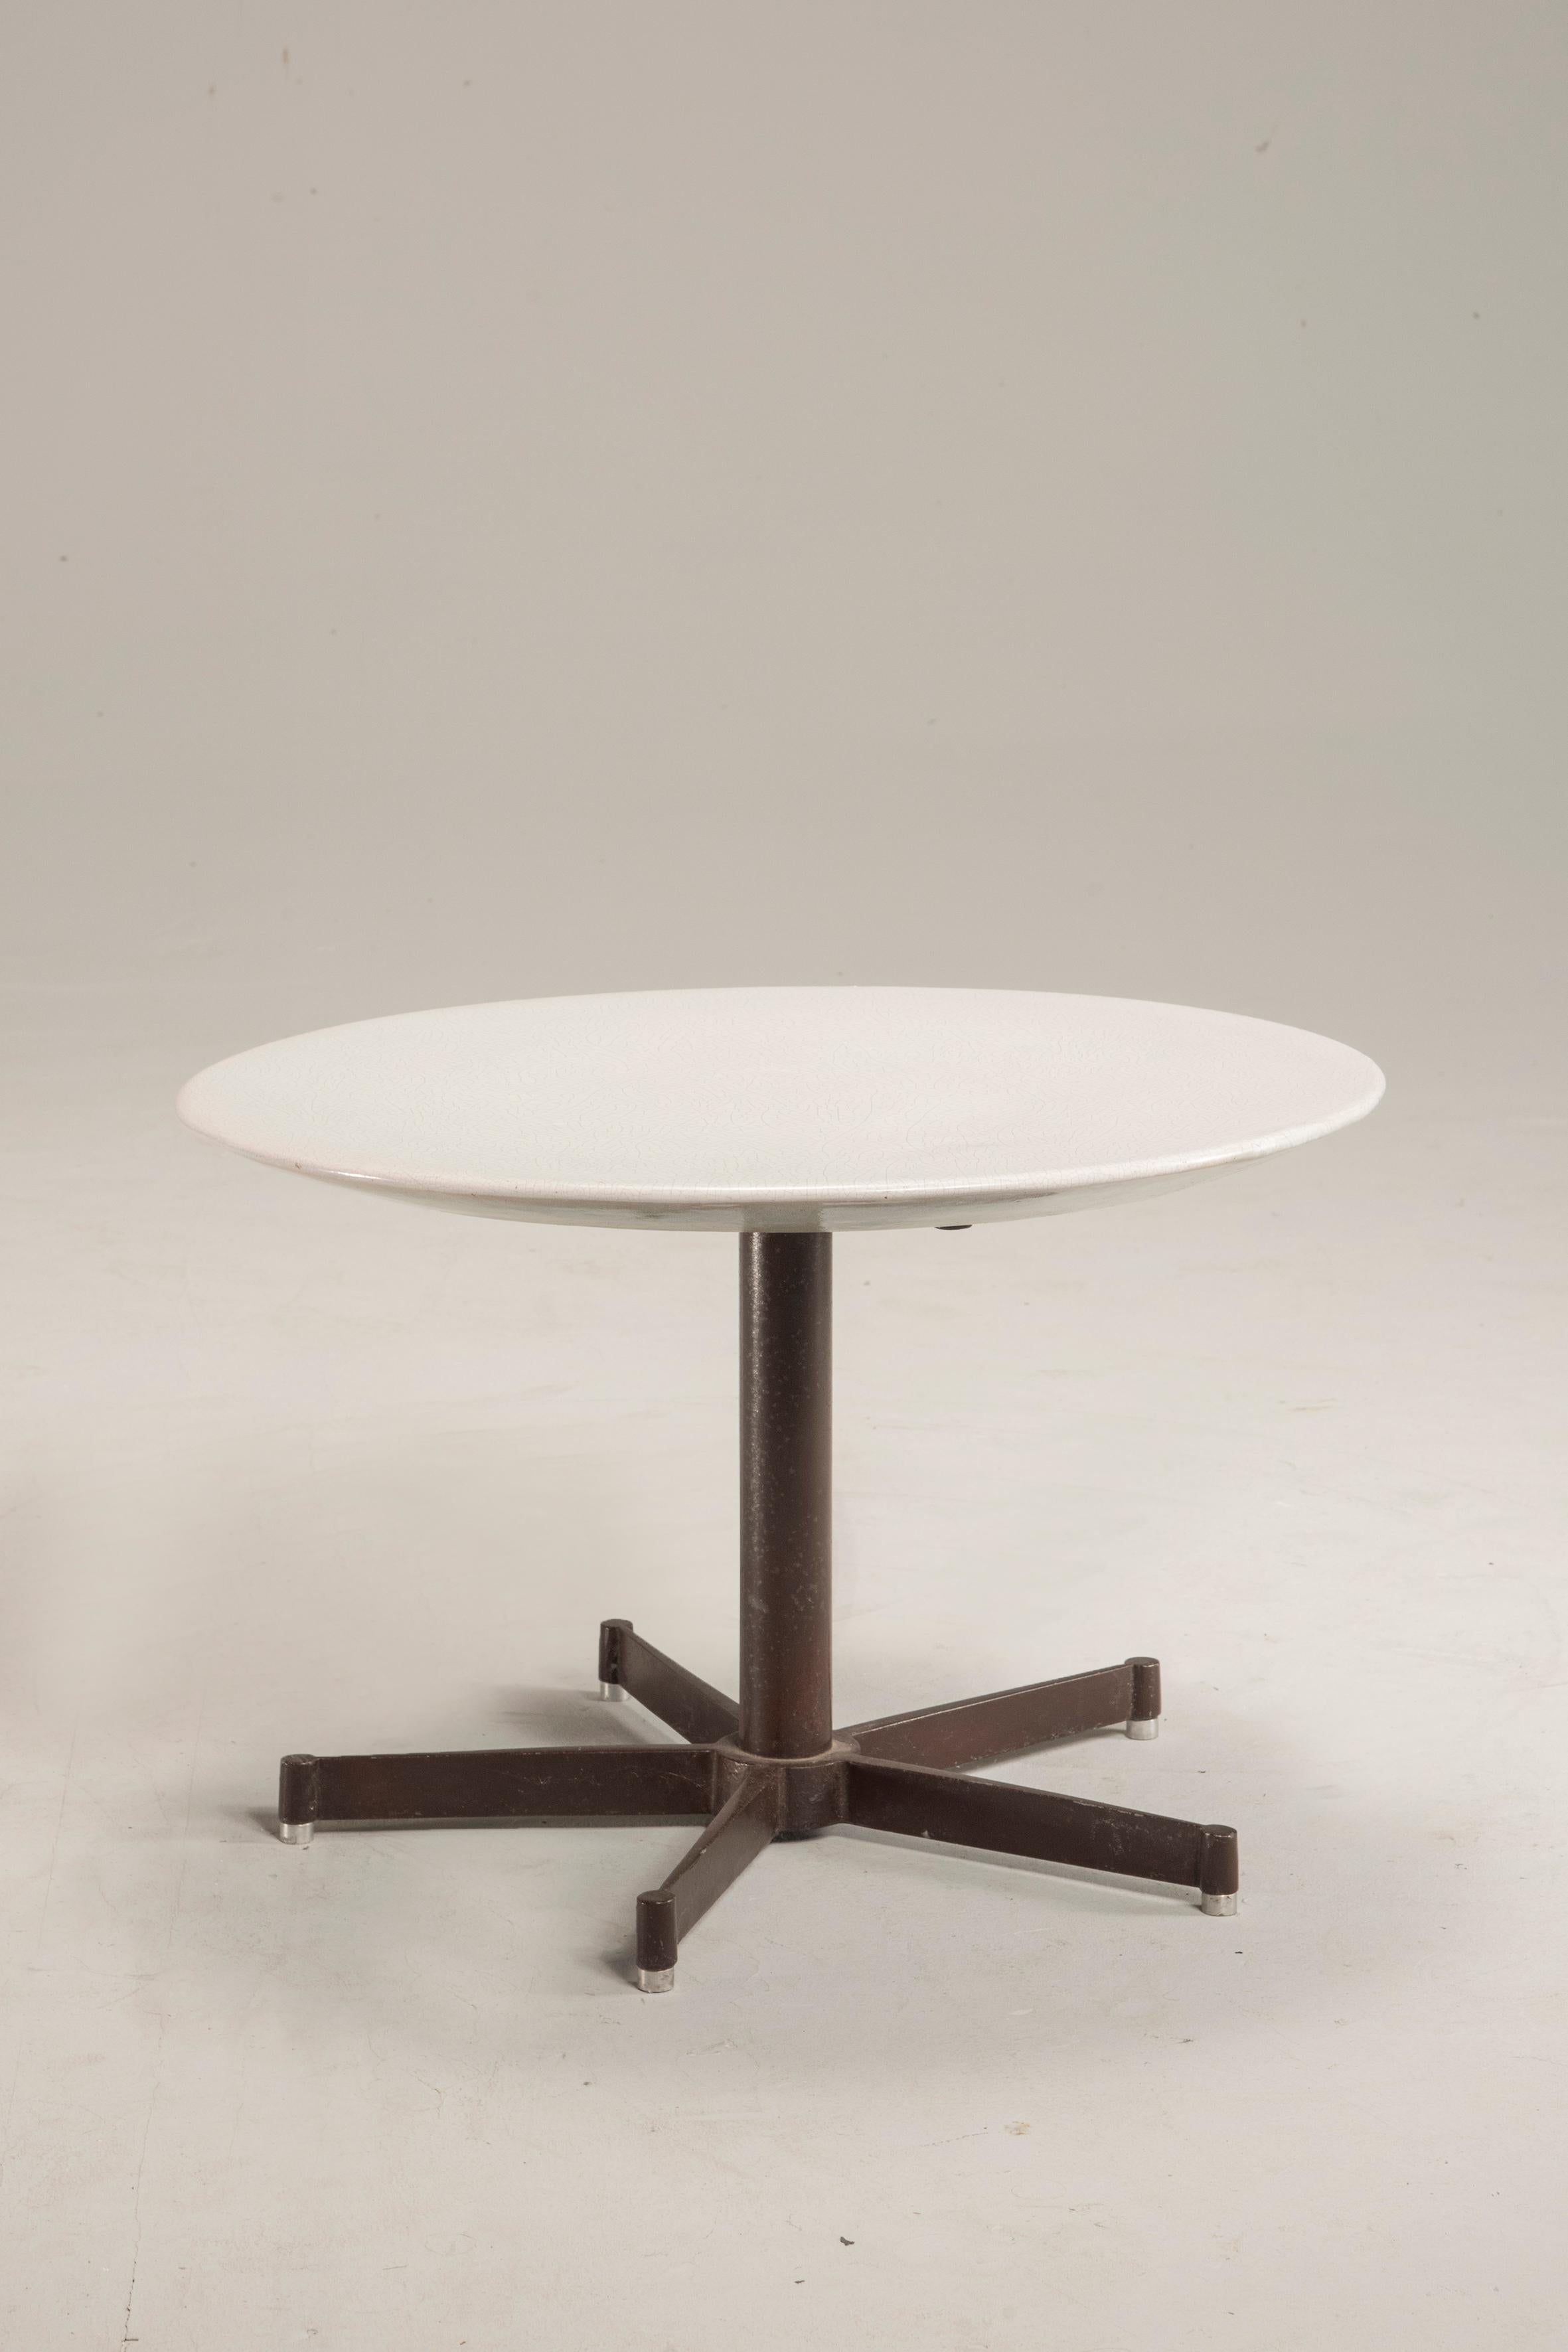 20th century Italian Industrial style rounded white ceramic and iron table by Pino Castagna, an Italian artist and sculptor from Verona. Signed above the top. 
The unique central leg which is in iron presents five irregular size feet. Size of the